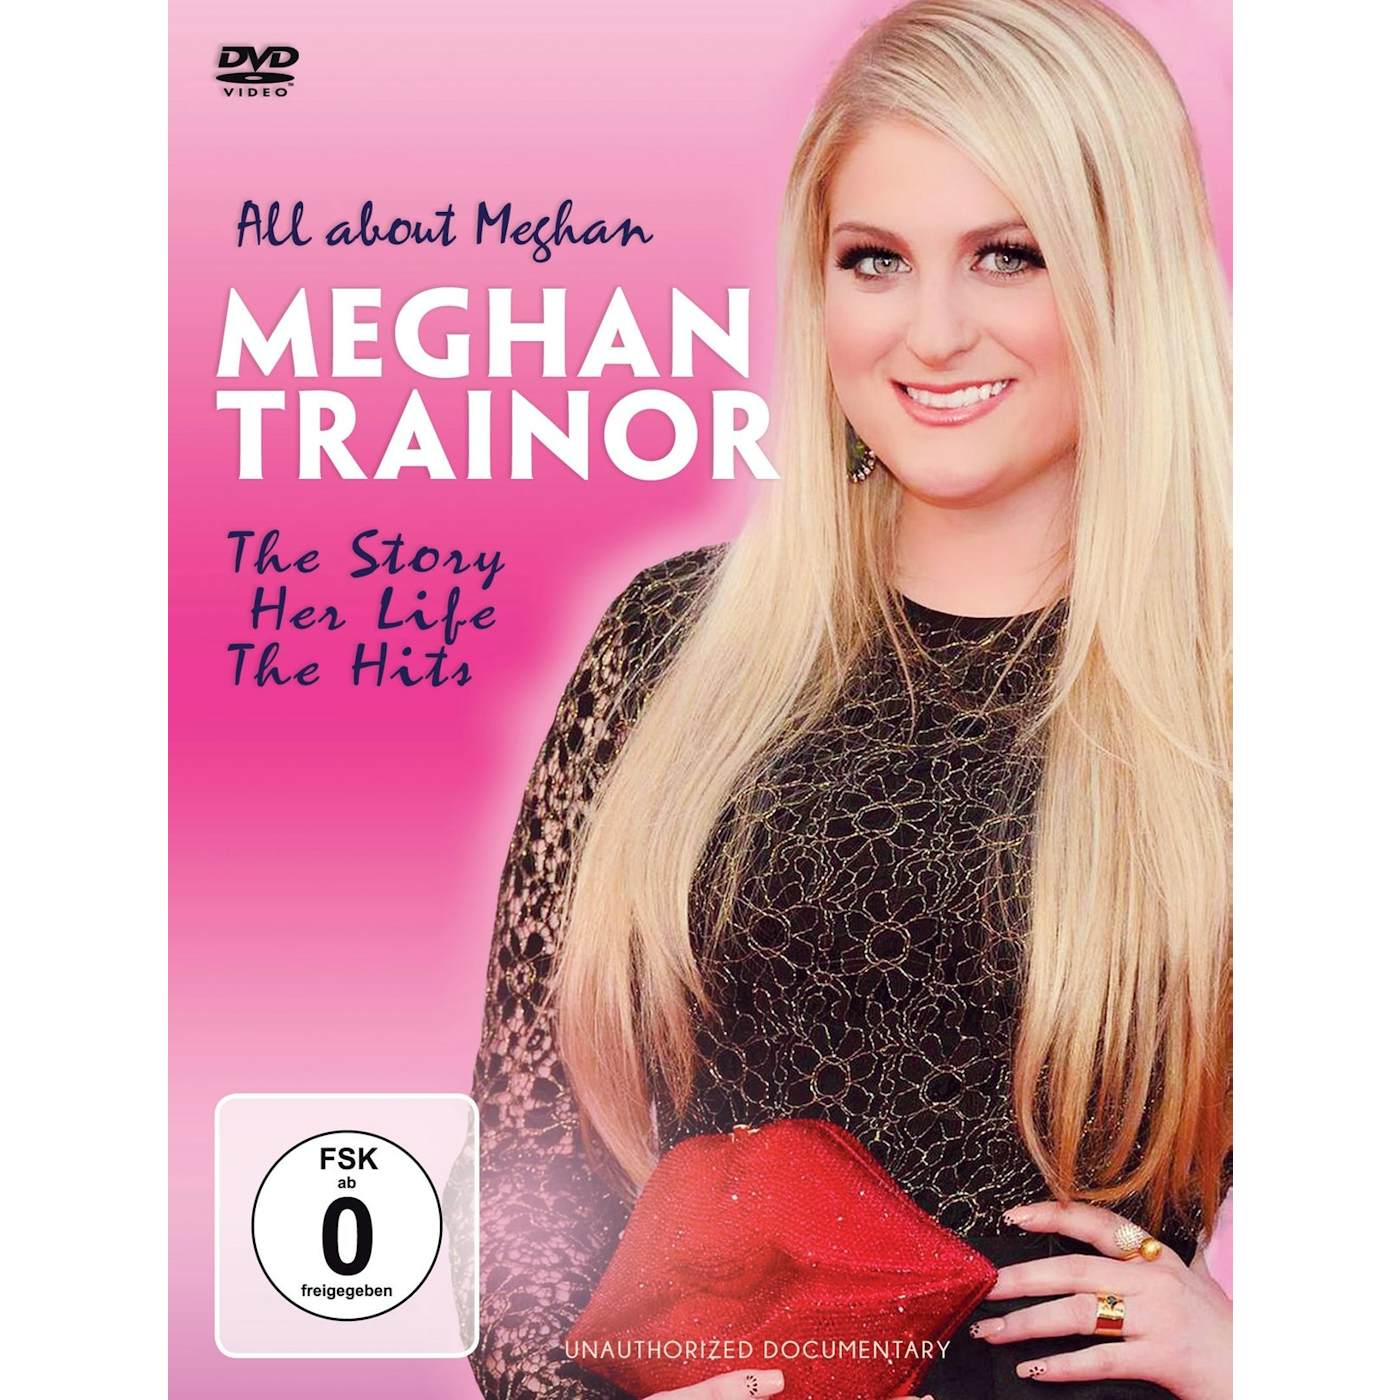 Meghan Trainor DVD - All About Meghan